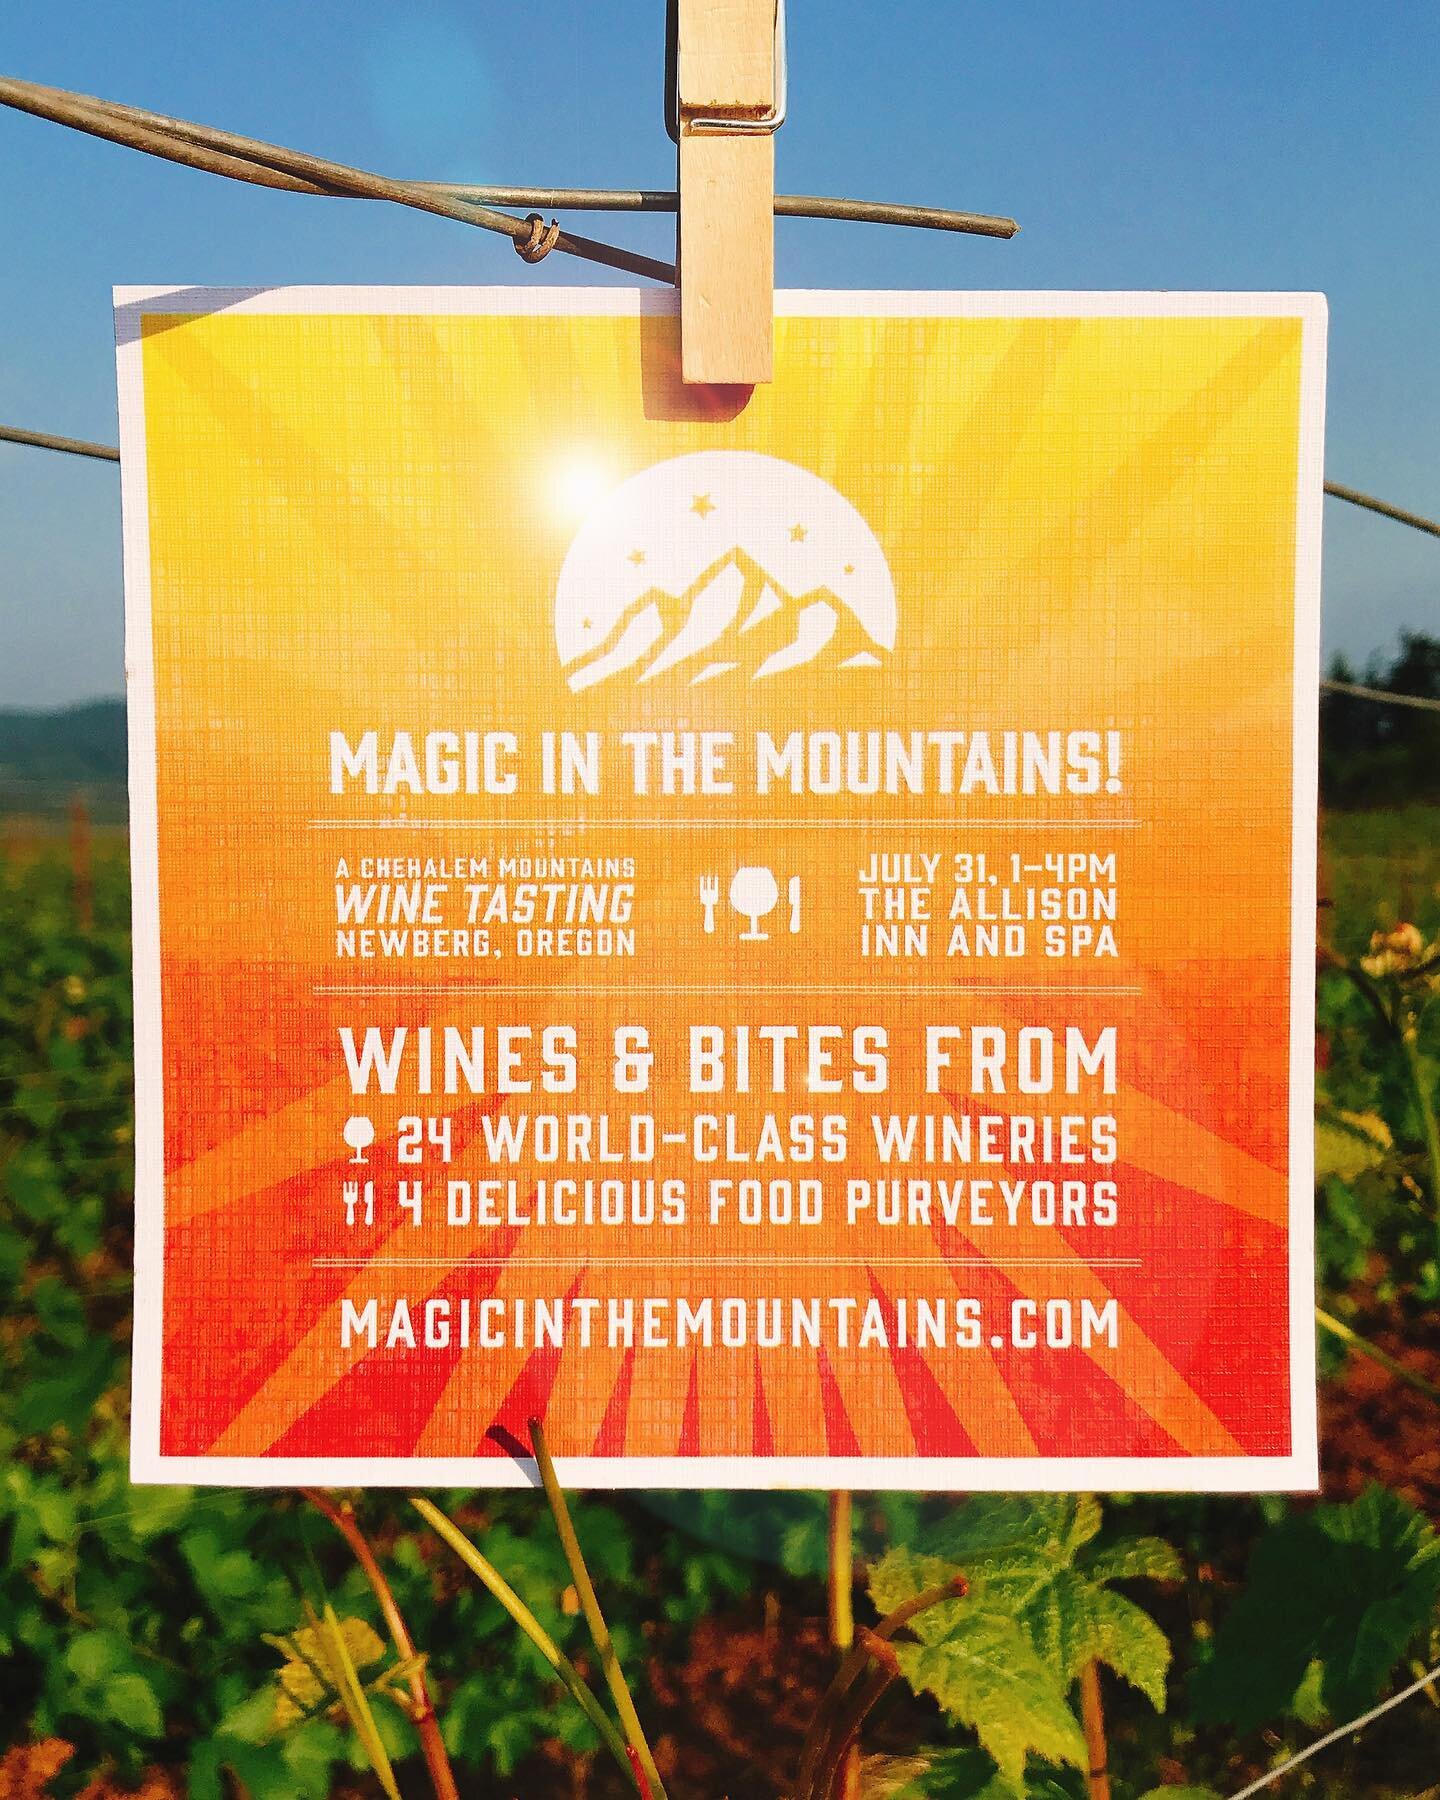 💥24 World-Class Wineries!
🍷48 Incredible Wines
👩🏼&zwj;🍳 4 Amazing Restaurants serving delicious bites!
🍕 and Pizza from Honey Pie and Little Olli! 
😋 We&rsquo;re getting so excited for Magic In The Mountains on July 31st at the @allisoninnspa 